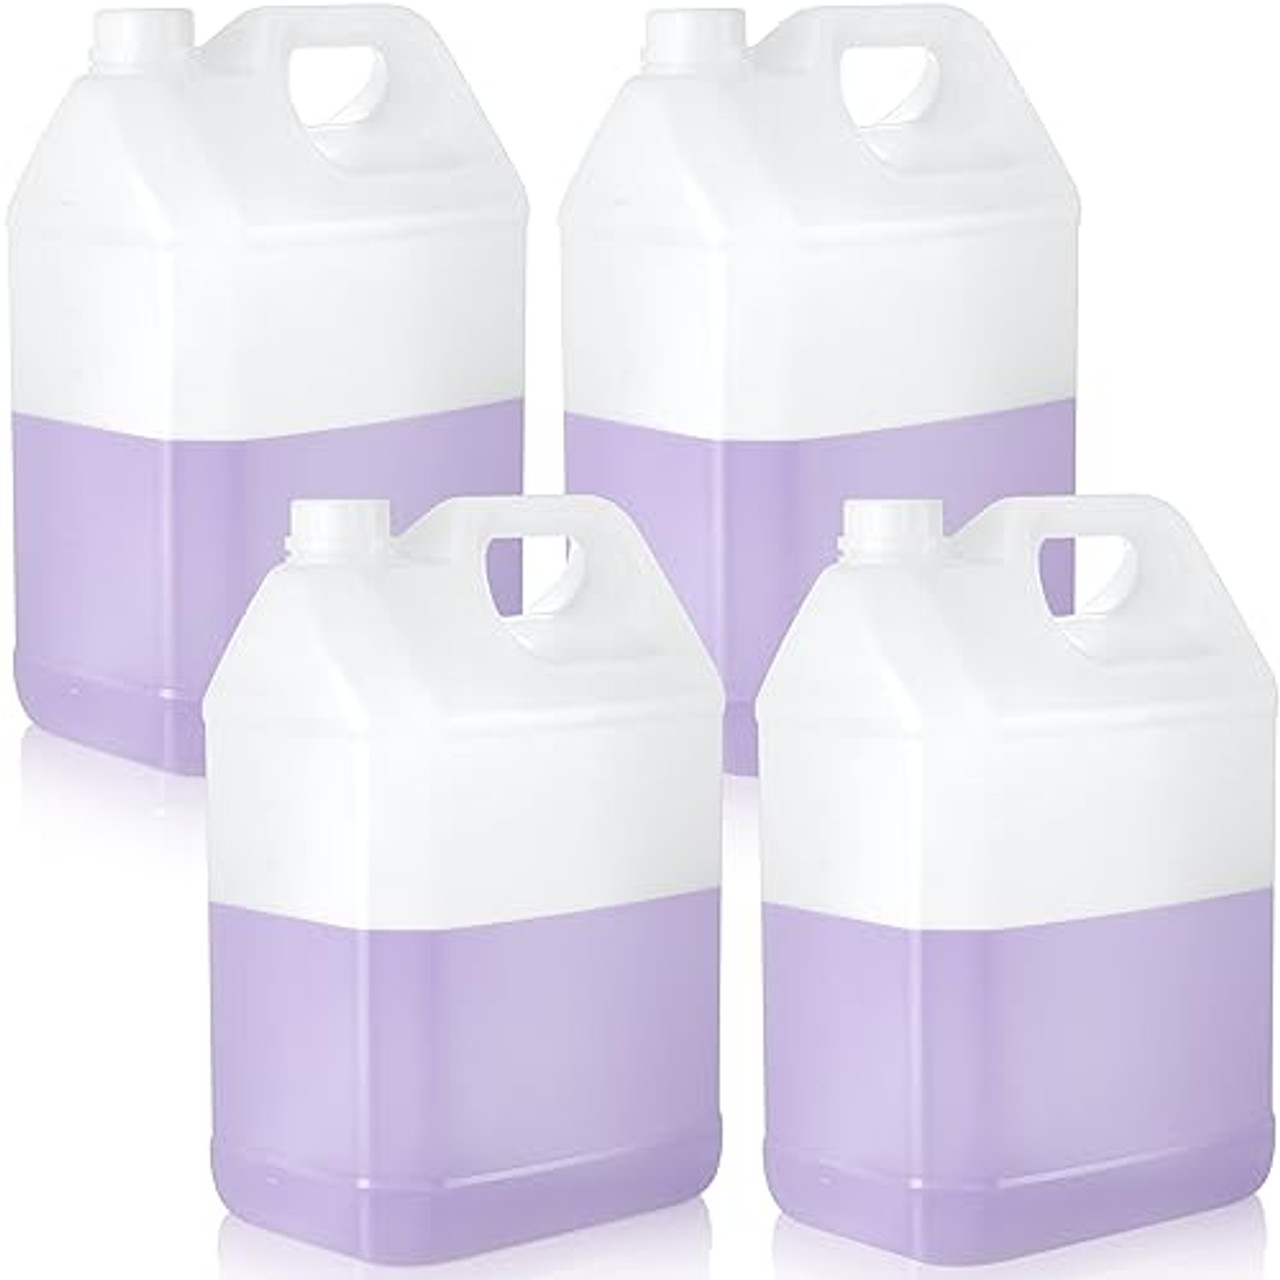 Zhehao 4 Pack Plastic Jug with Lids 2.5 Gallon White Storage